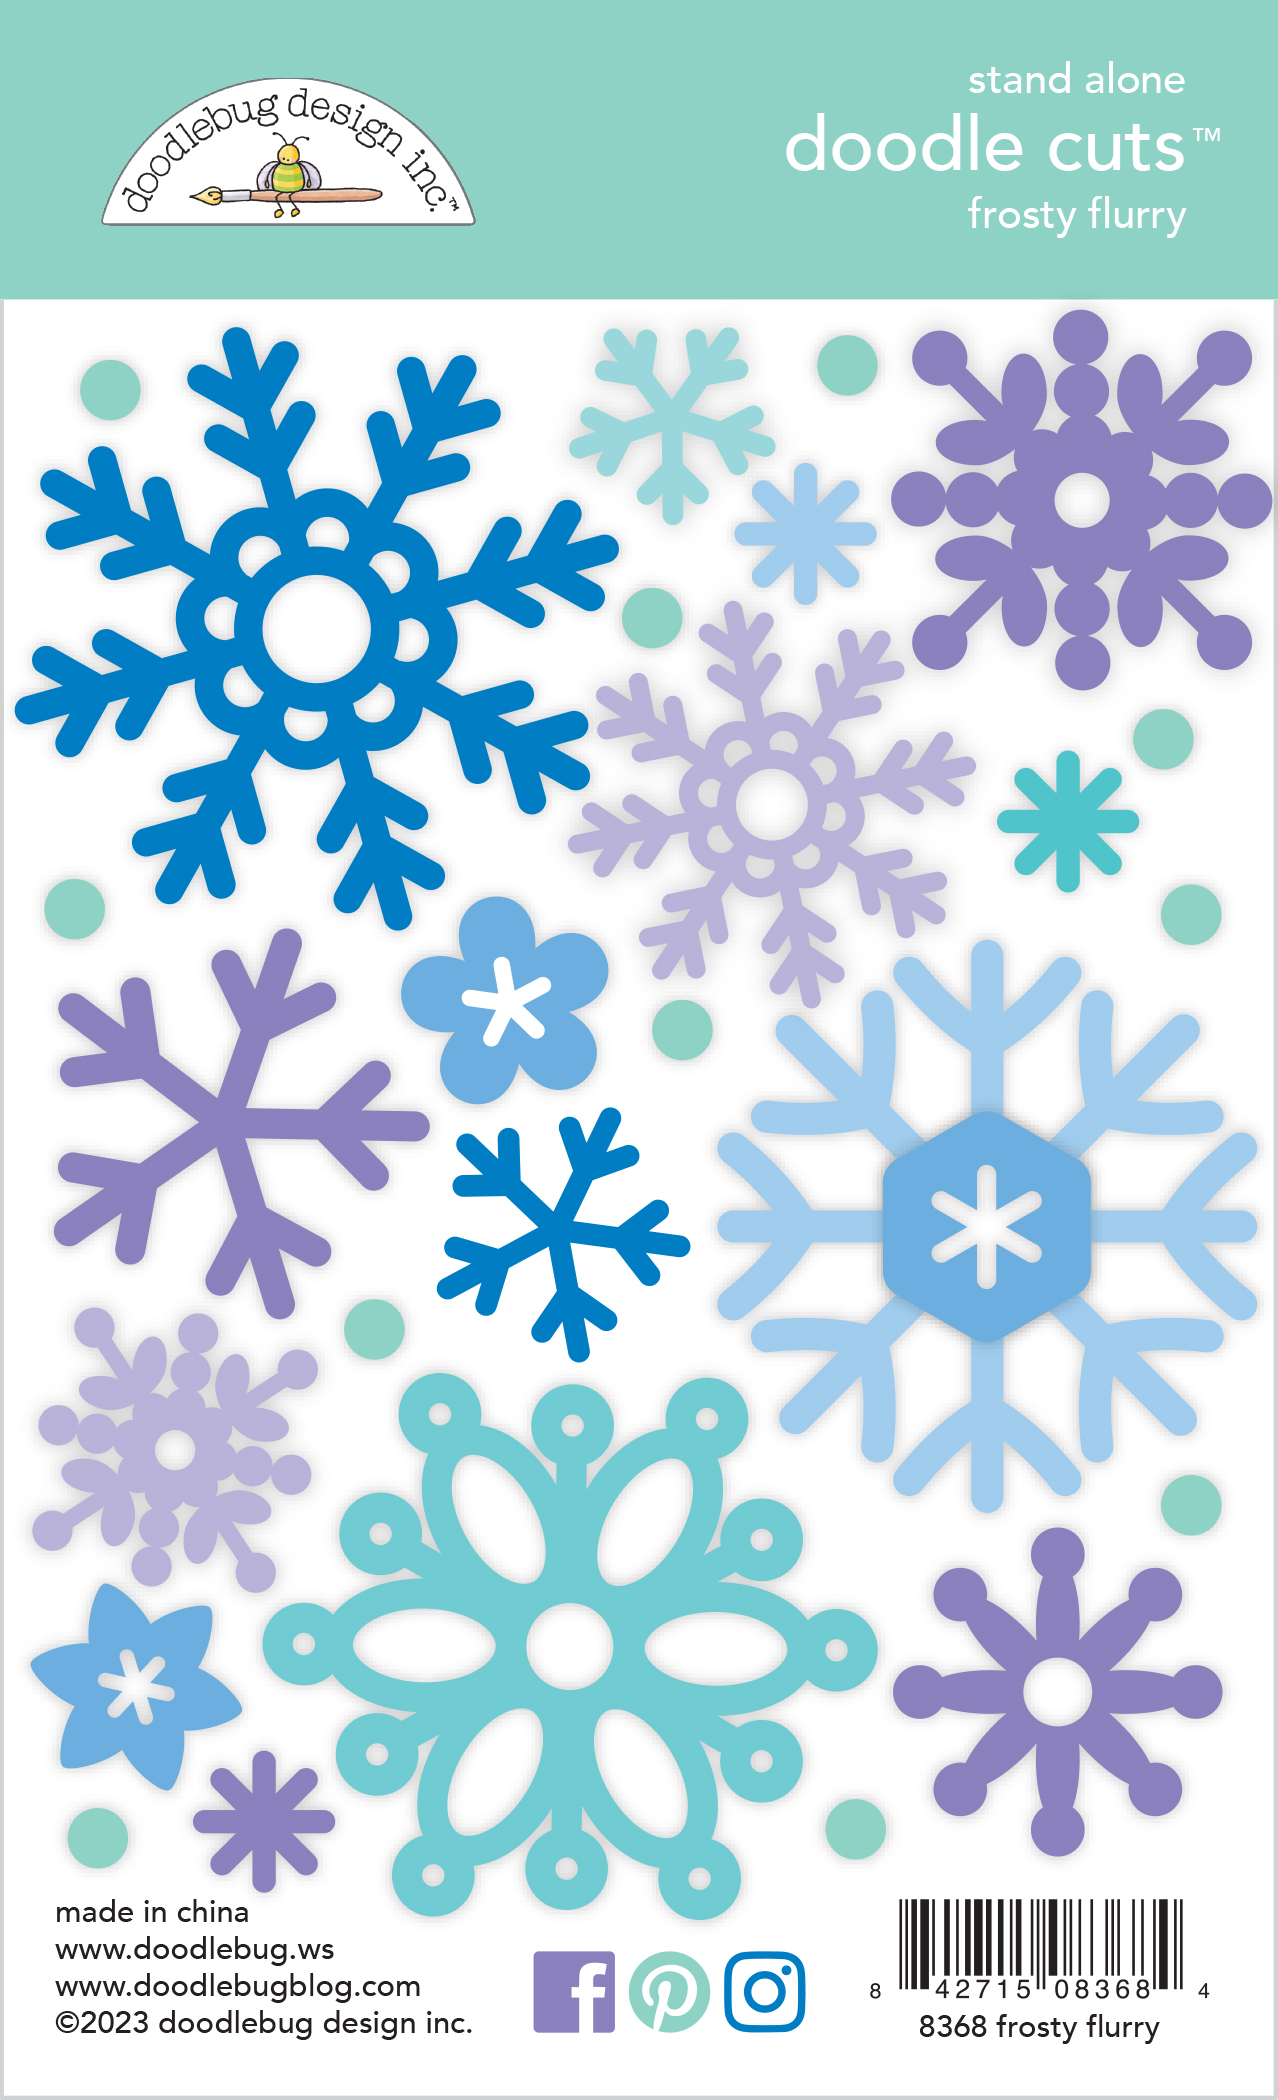 Doodlebug Snow Much Fun Frosty Flurry Doodle Cuts